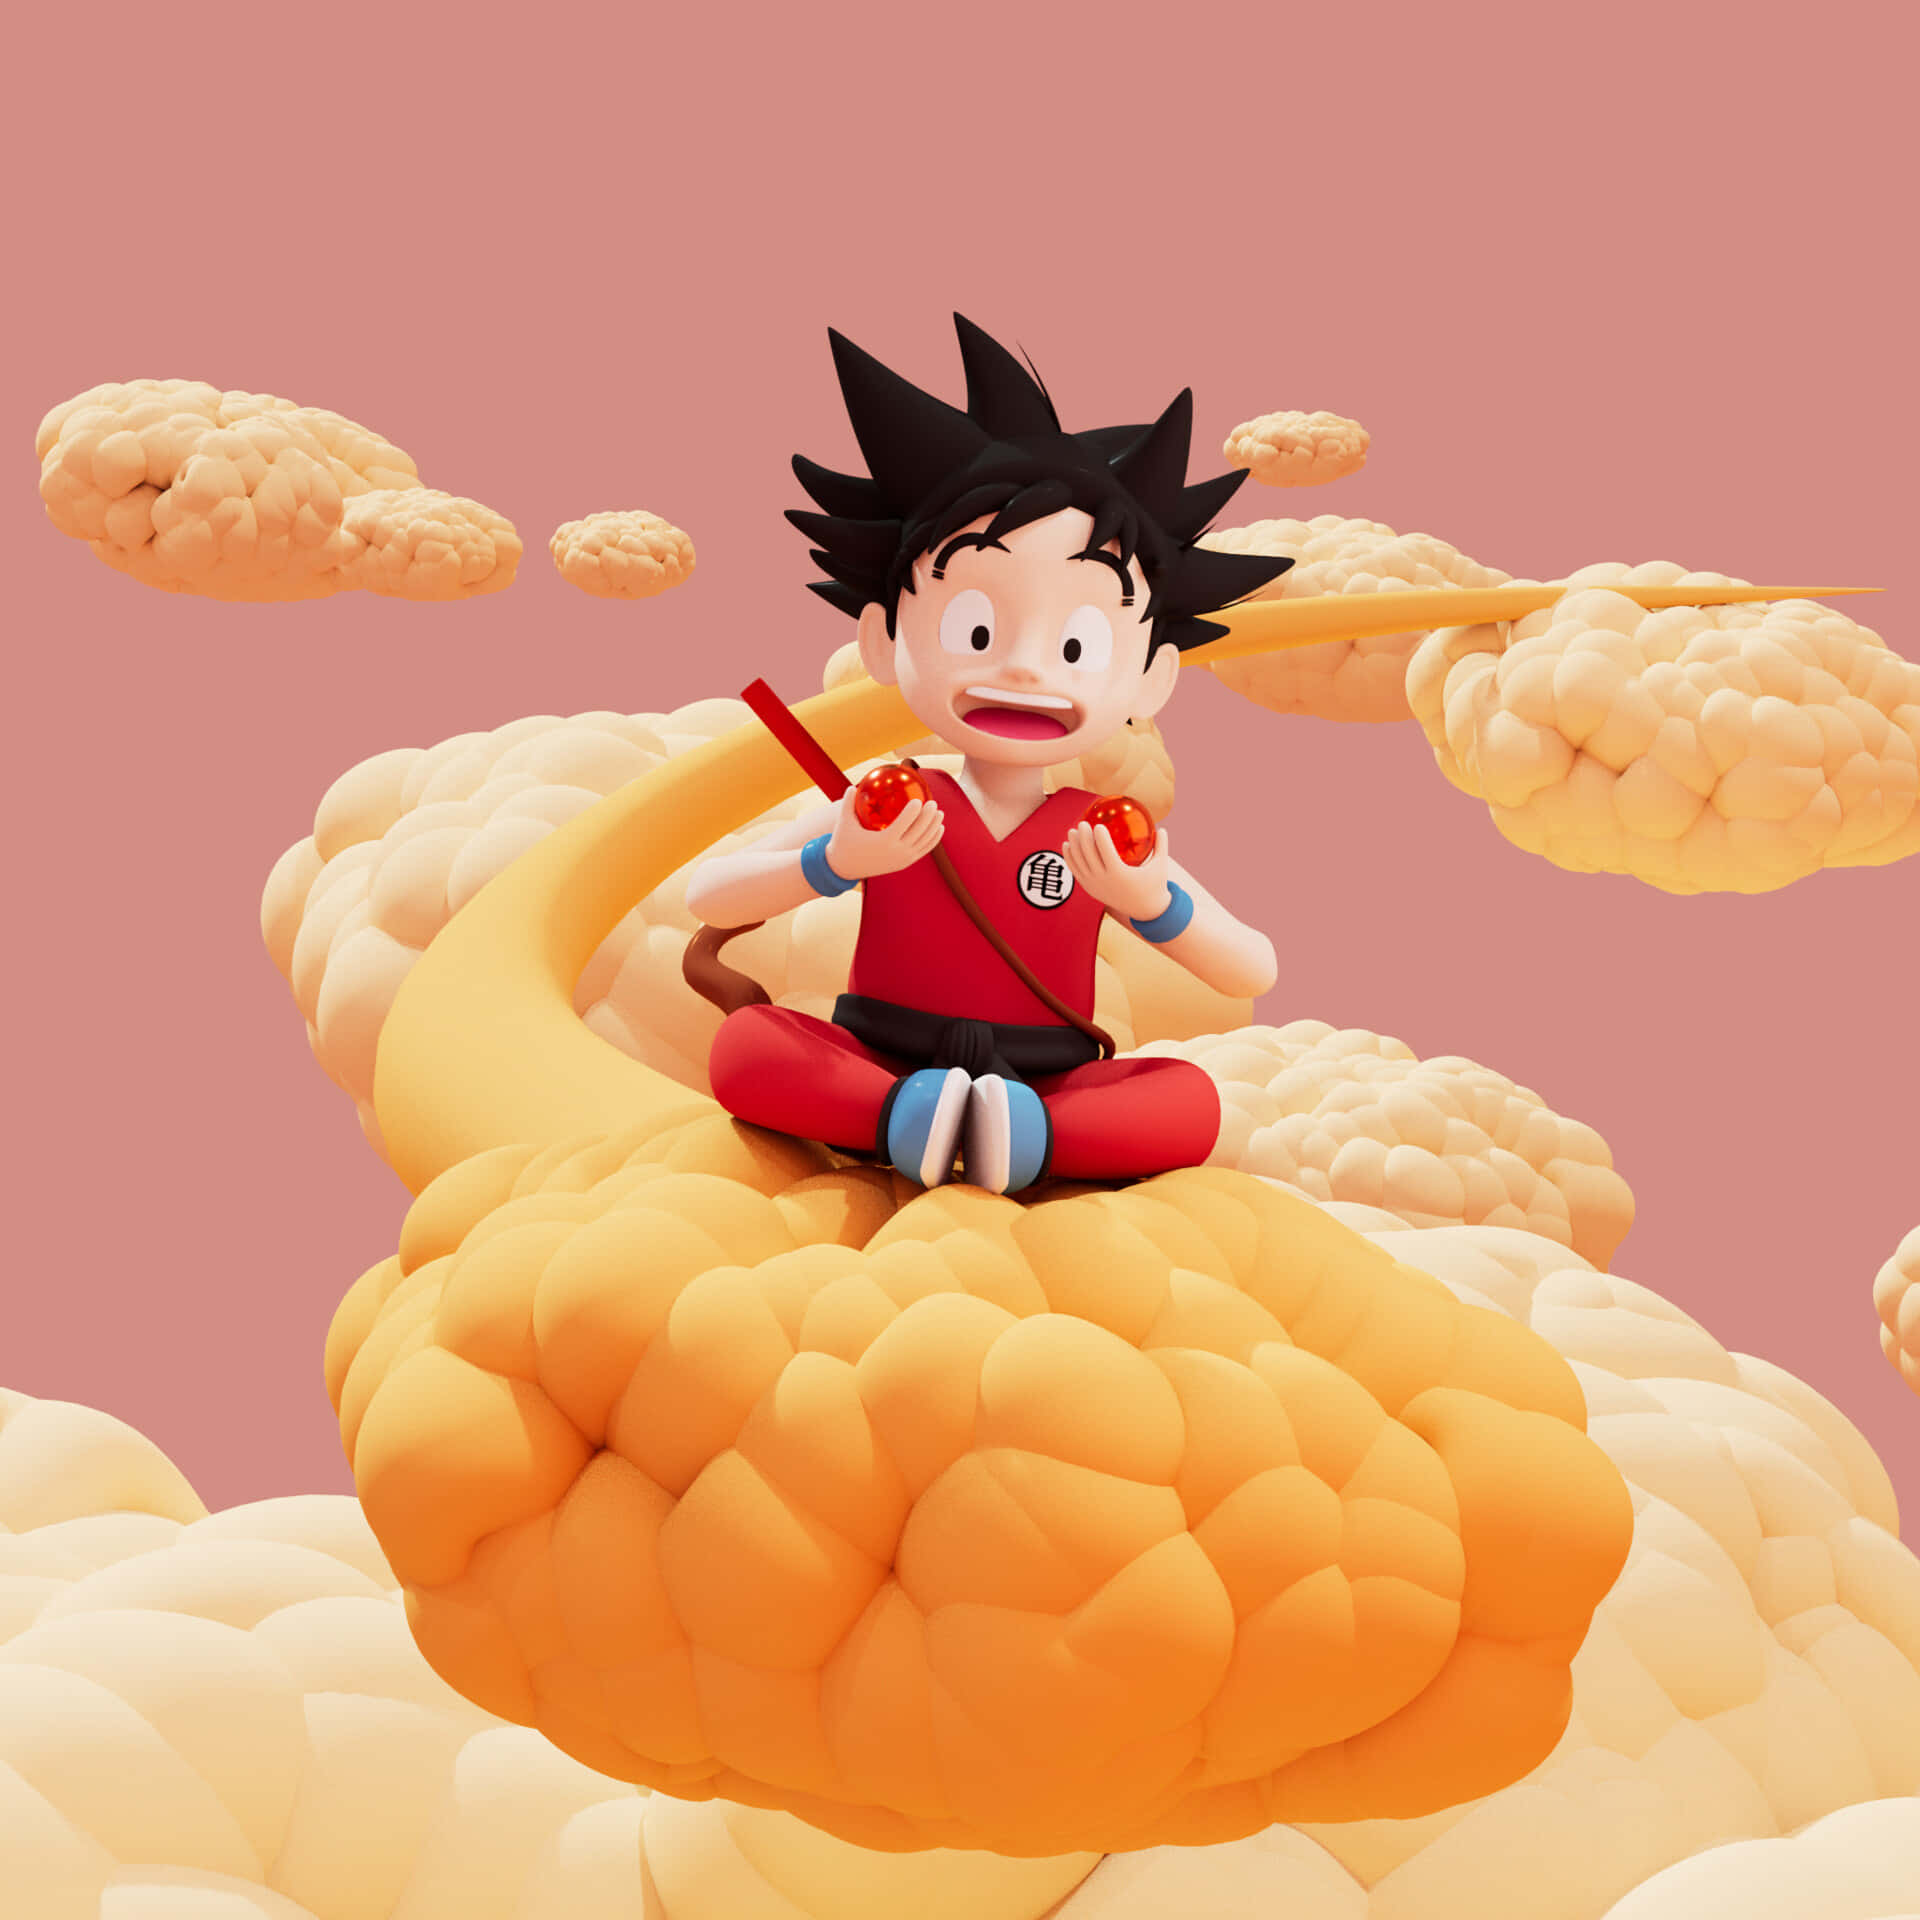 The Nimbus clouds: the eternal symbol of luck and hope. Wallpaper